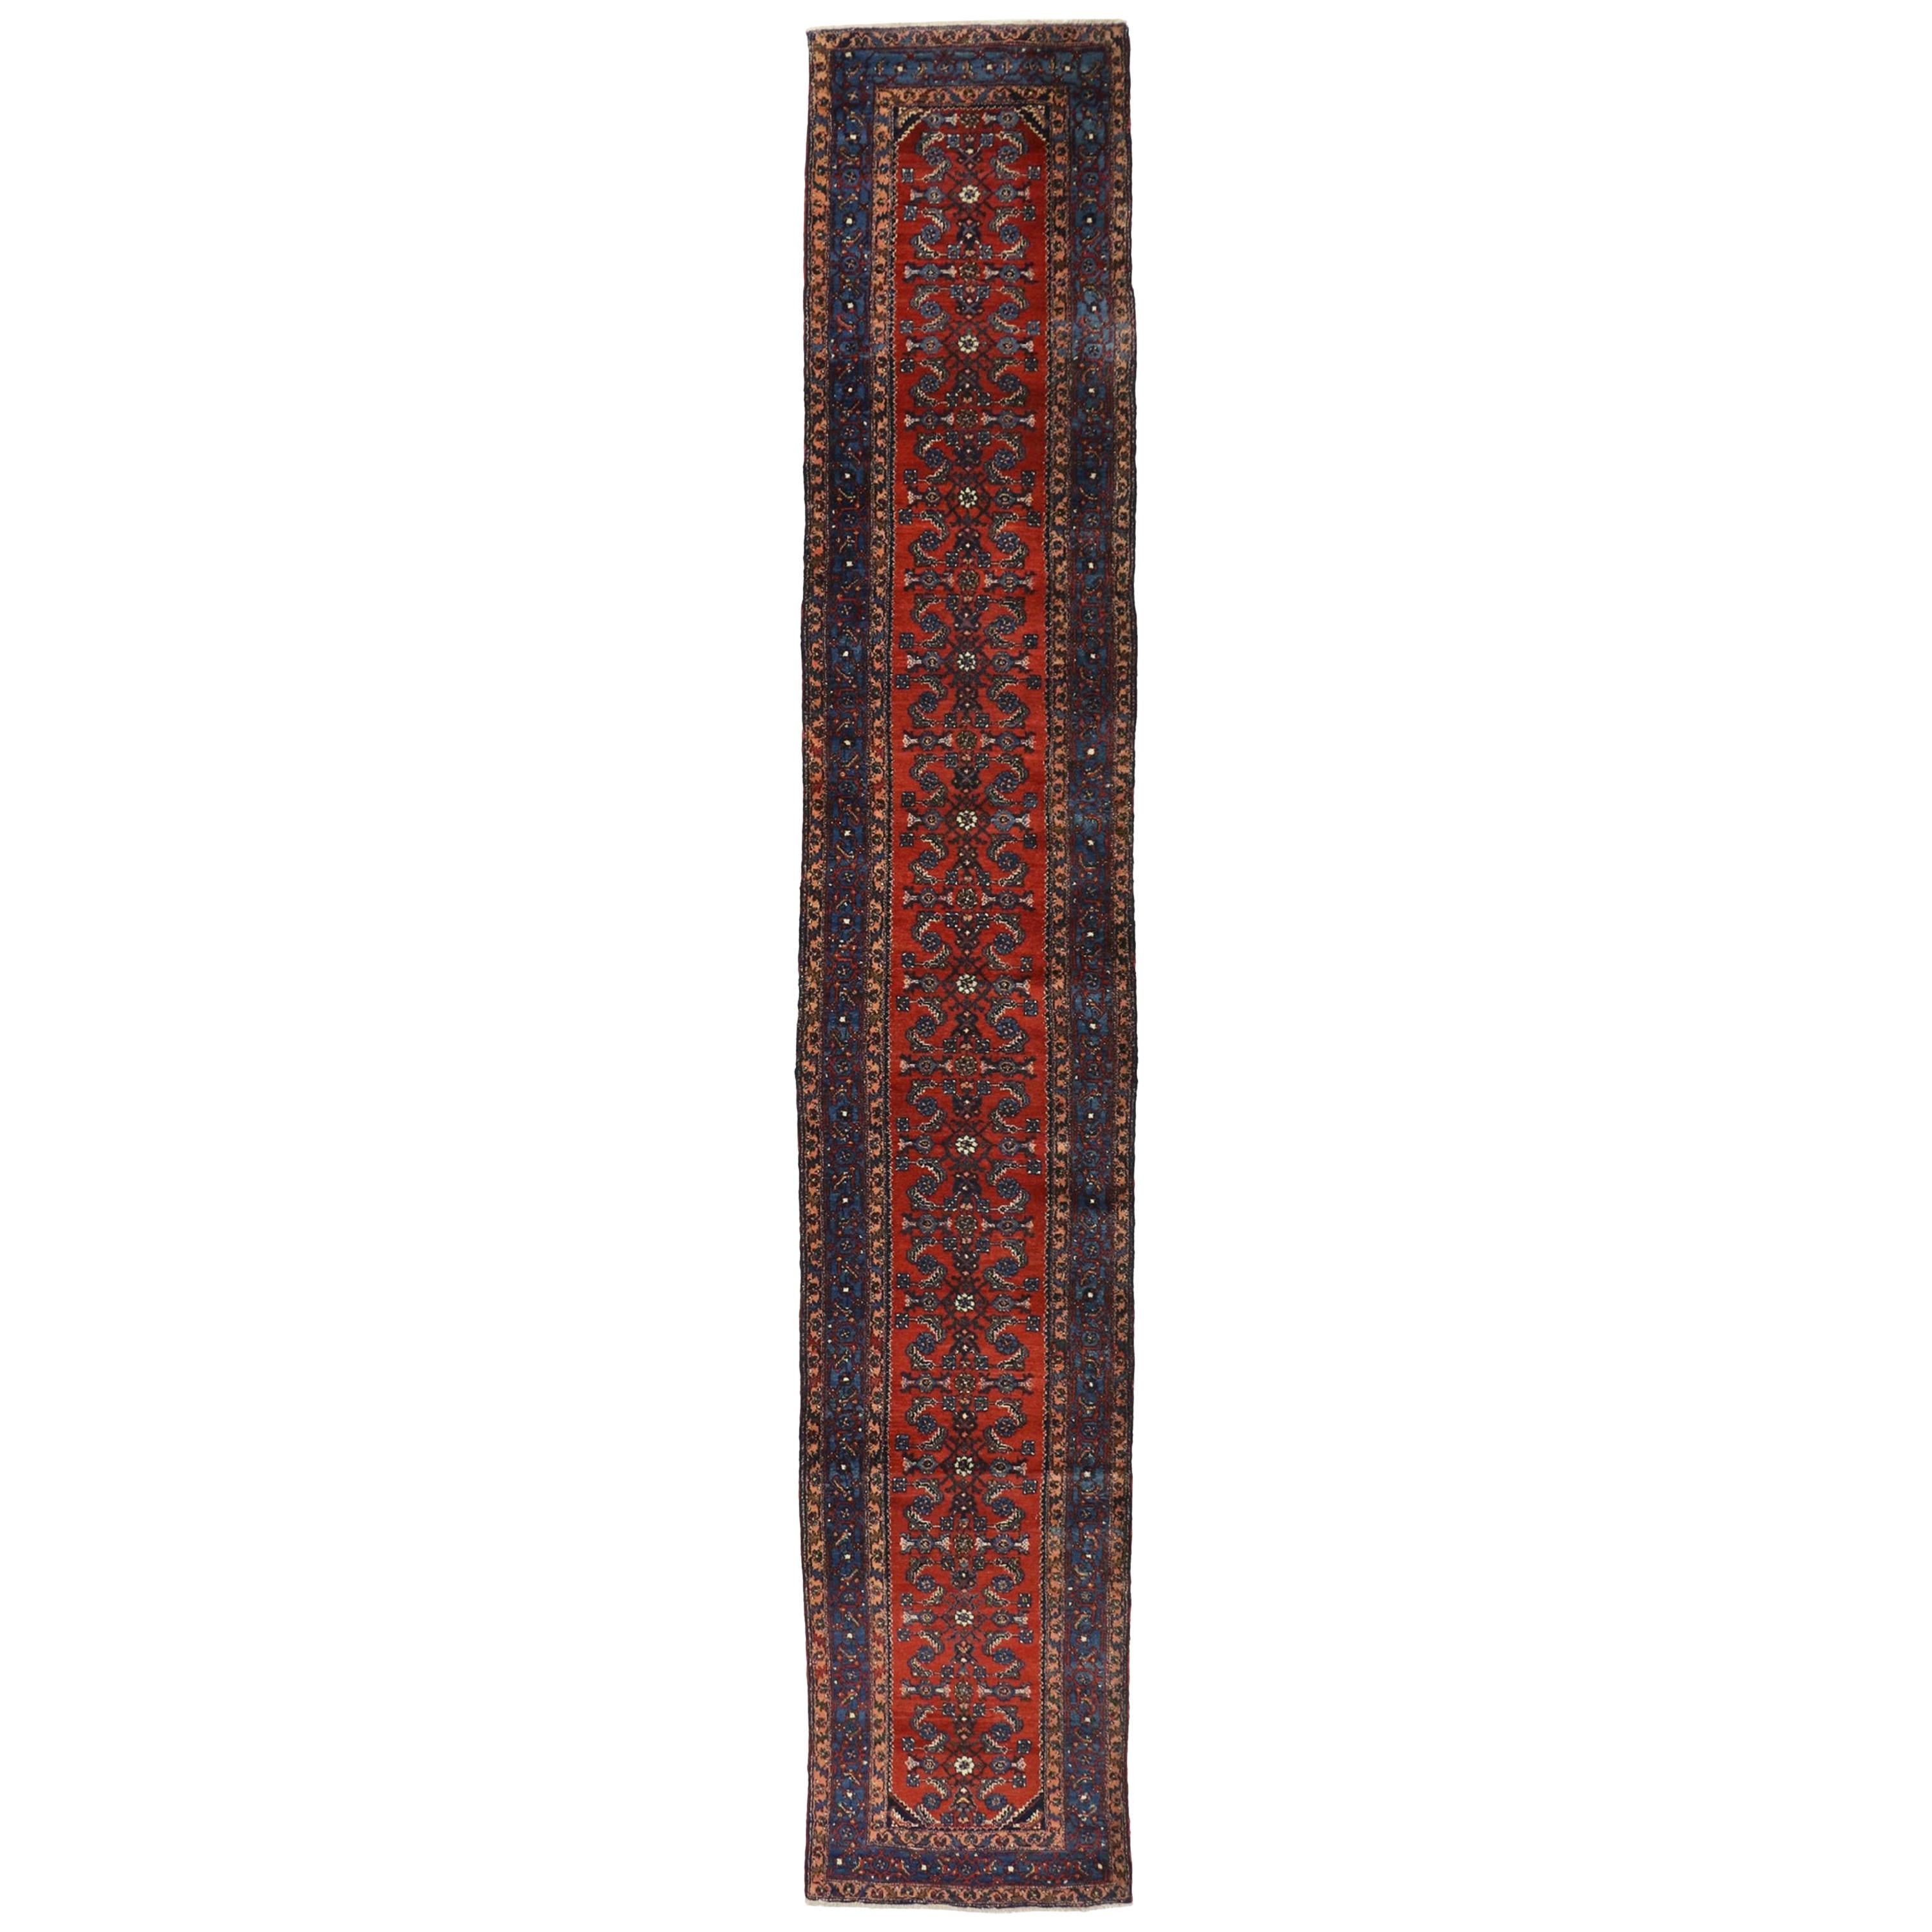 Antique Persian Malayer Long Runner with Elizabeth Tudor Style